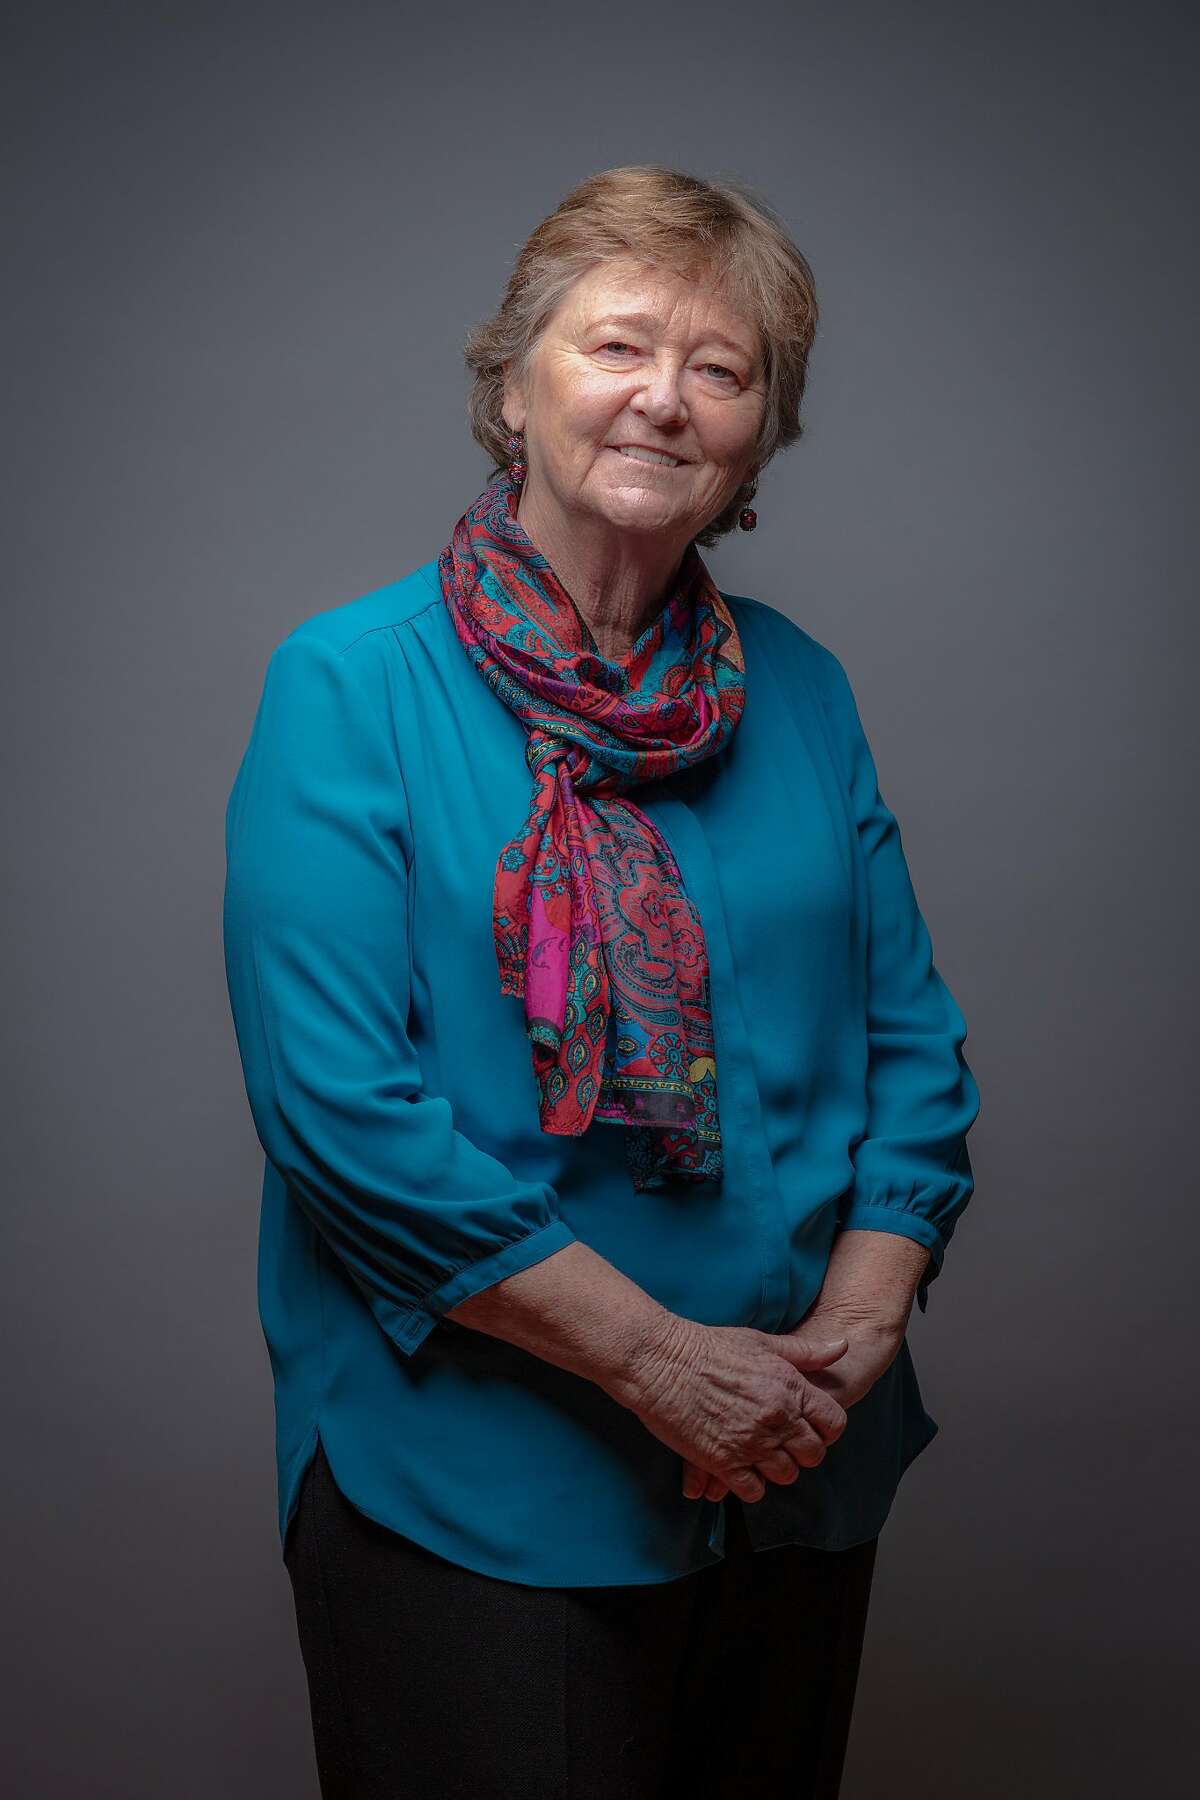 Visionary finalist, Martha Ryan, founder and exec director of the Homeless Prenatal Project Tuesday 08 January 2019 in San Francisco, CA. (Peter DaSilva Special to the Chronicle)